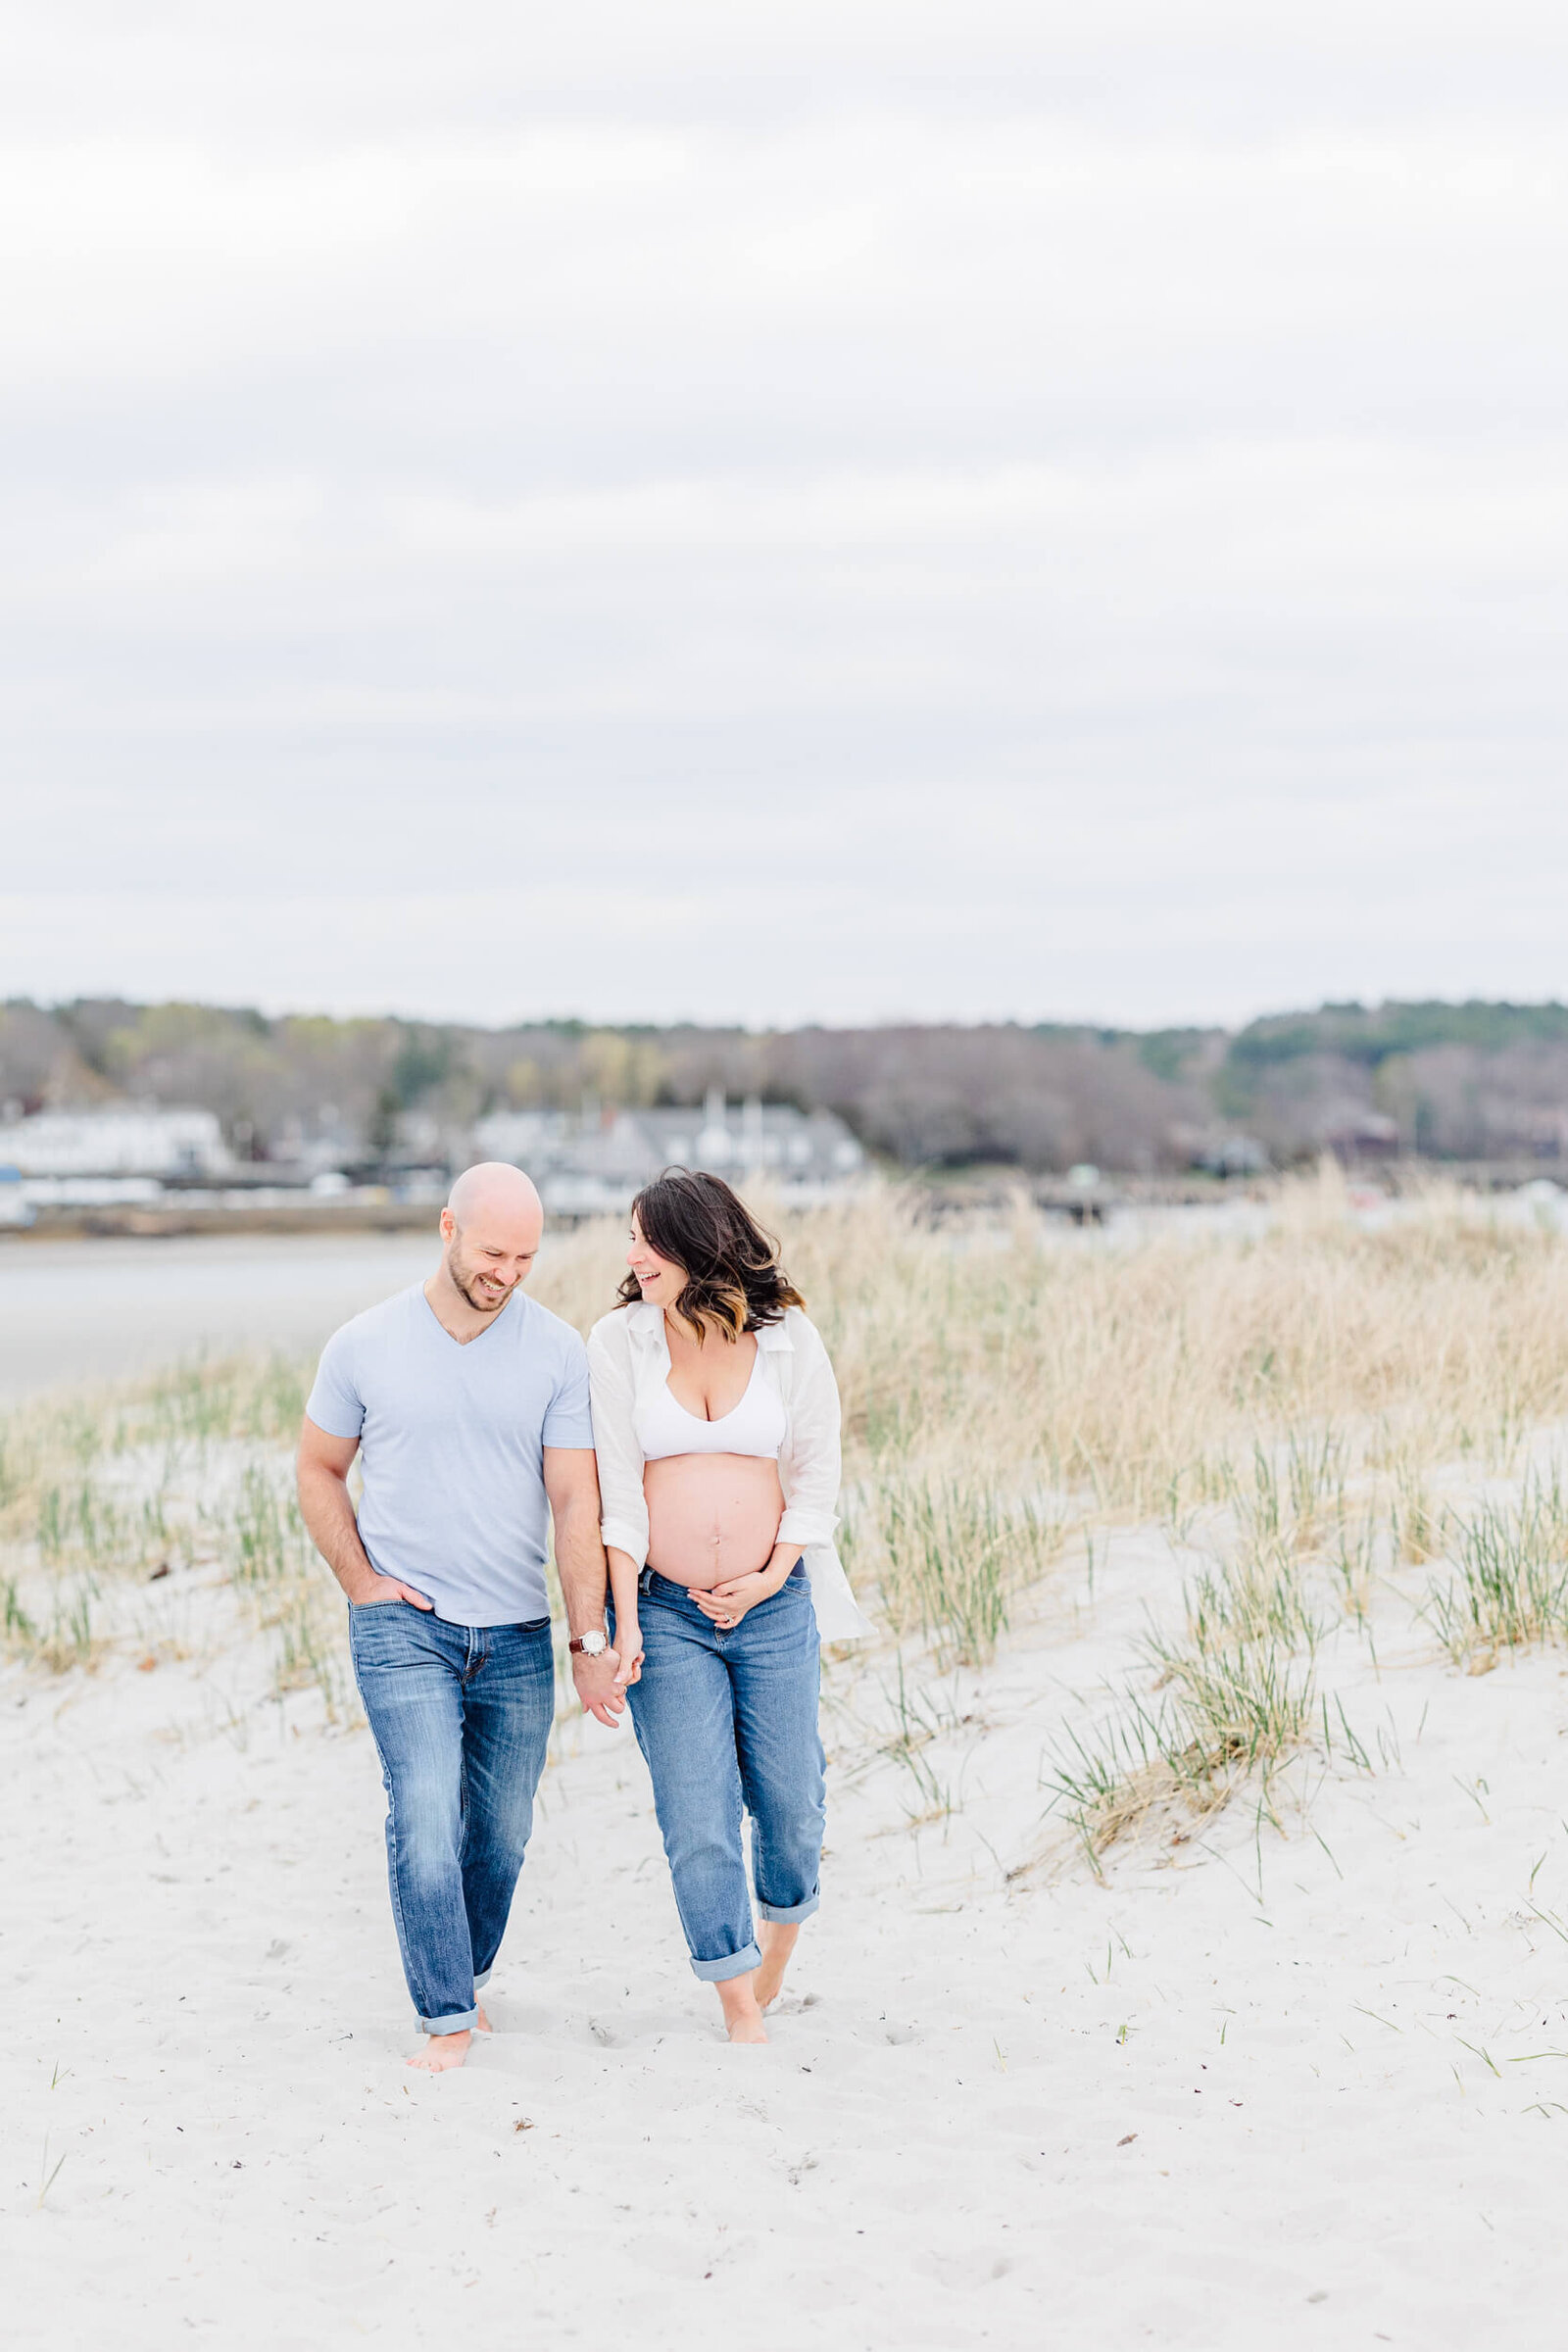 Pregnant woman and her husband laugh together on a sandy path